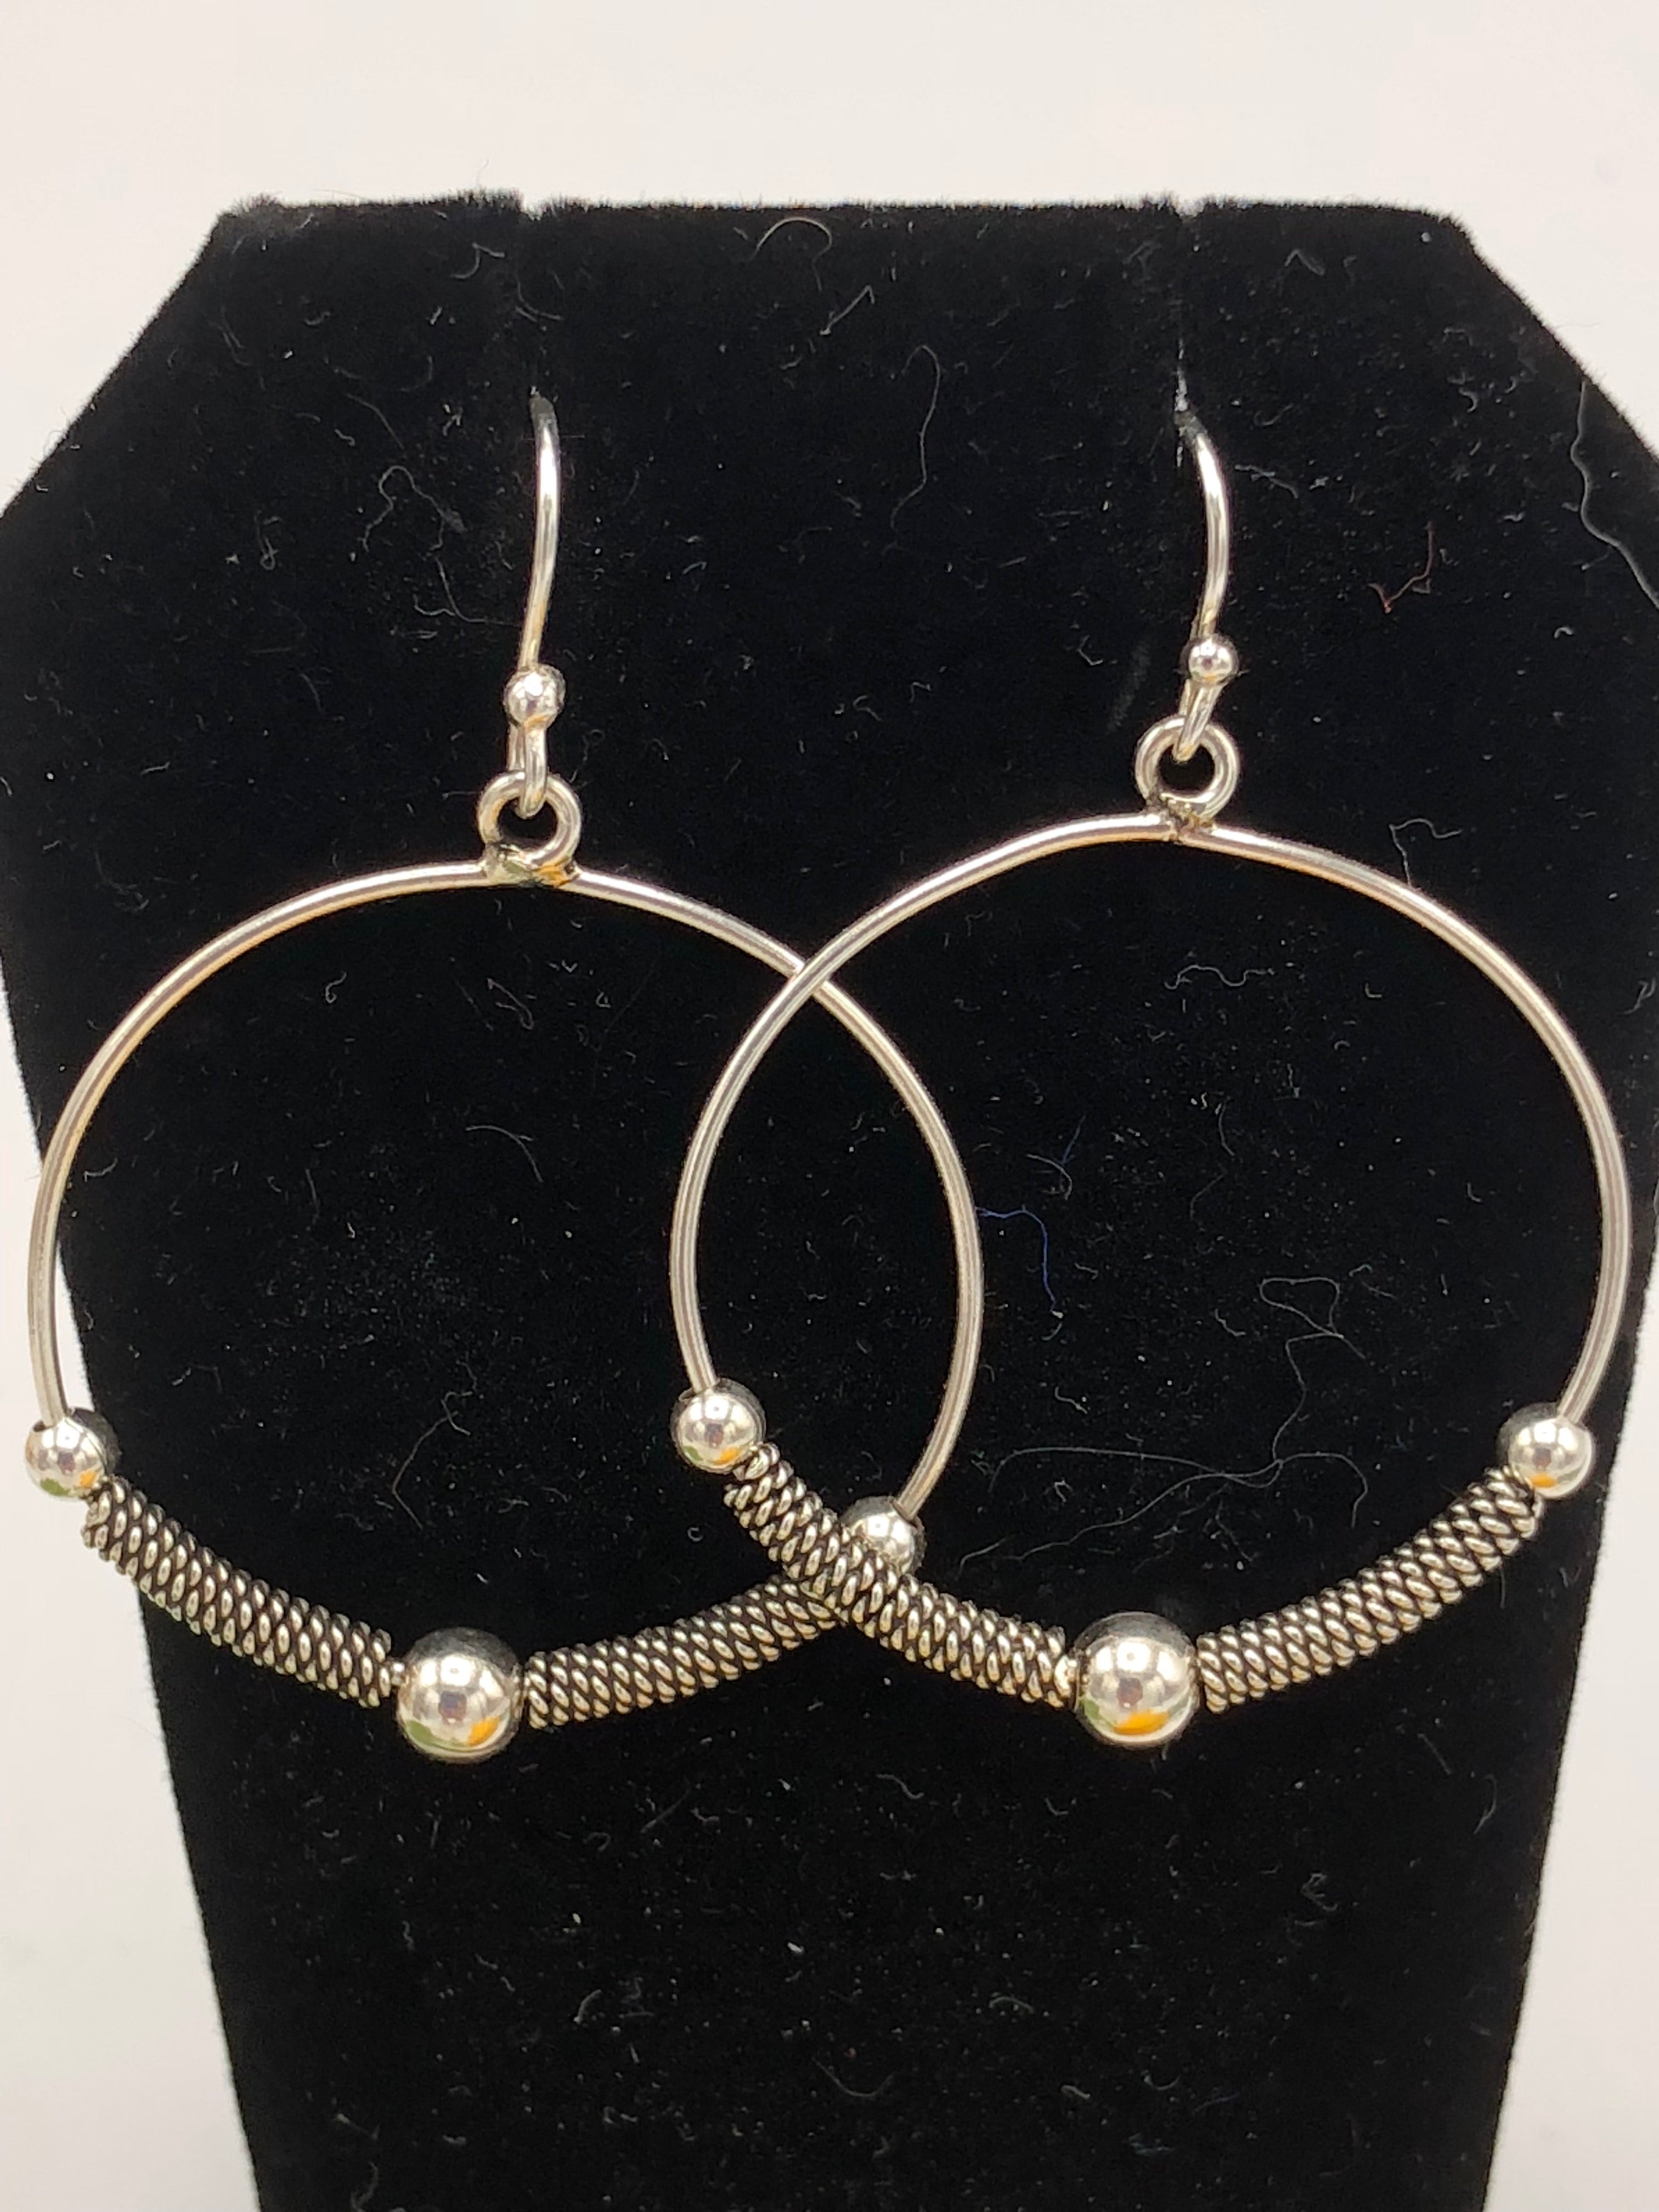 Sterling Earrings antique tone hoops with rope design and silver balls